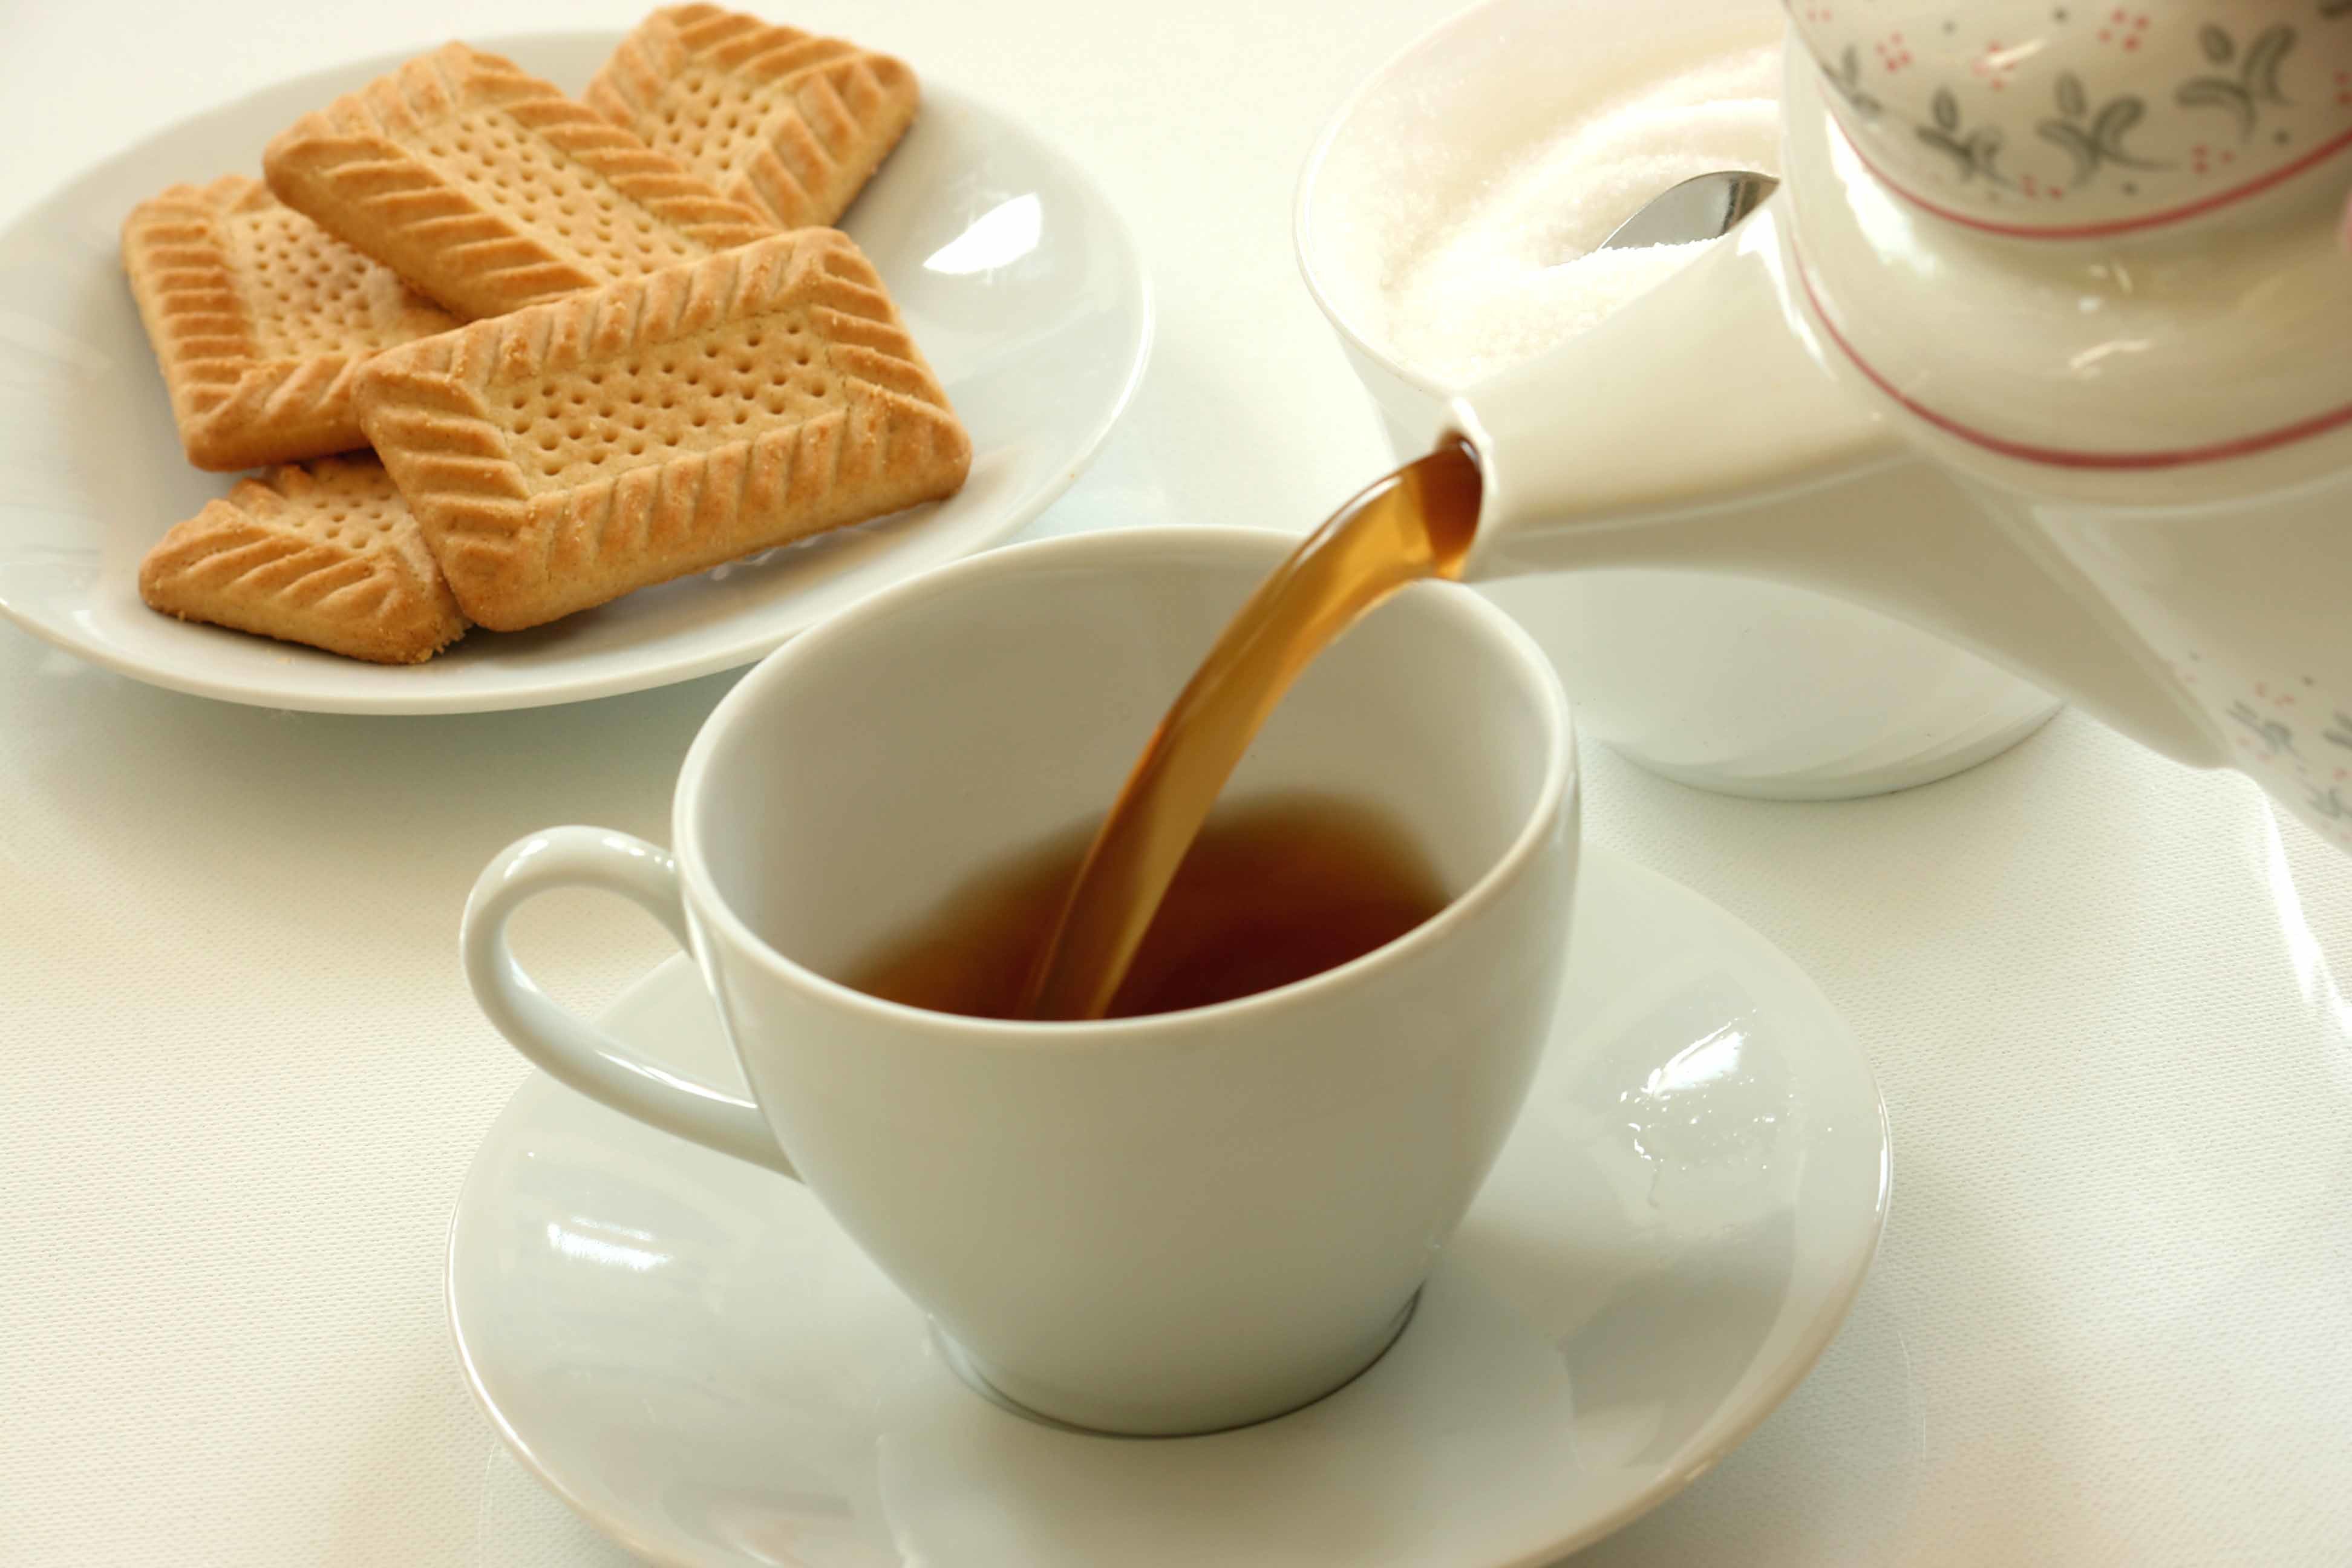 Tea and biscuits photo